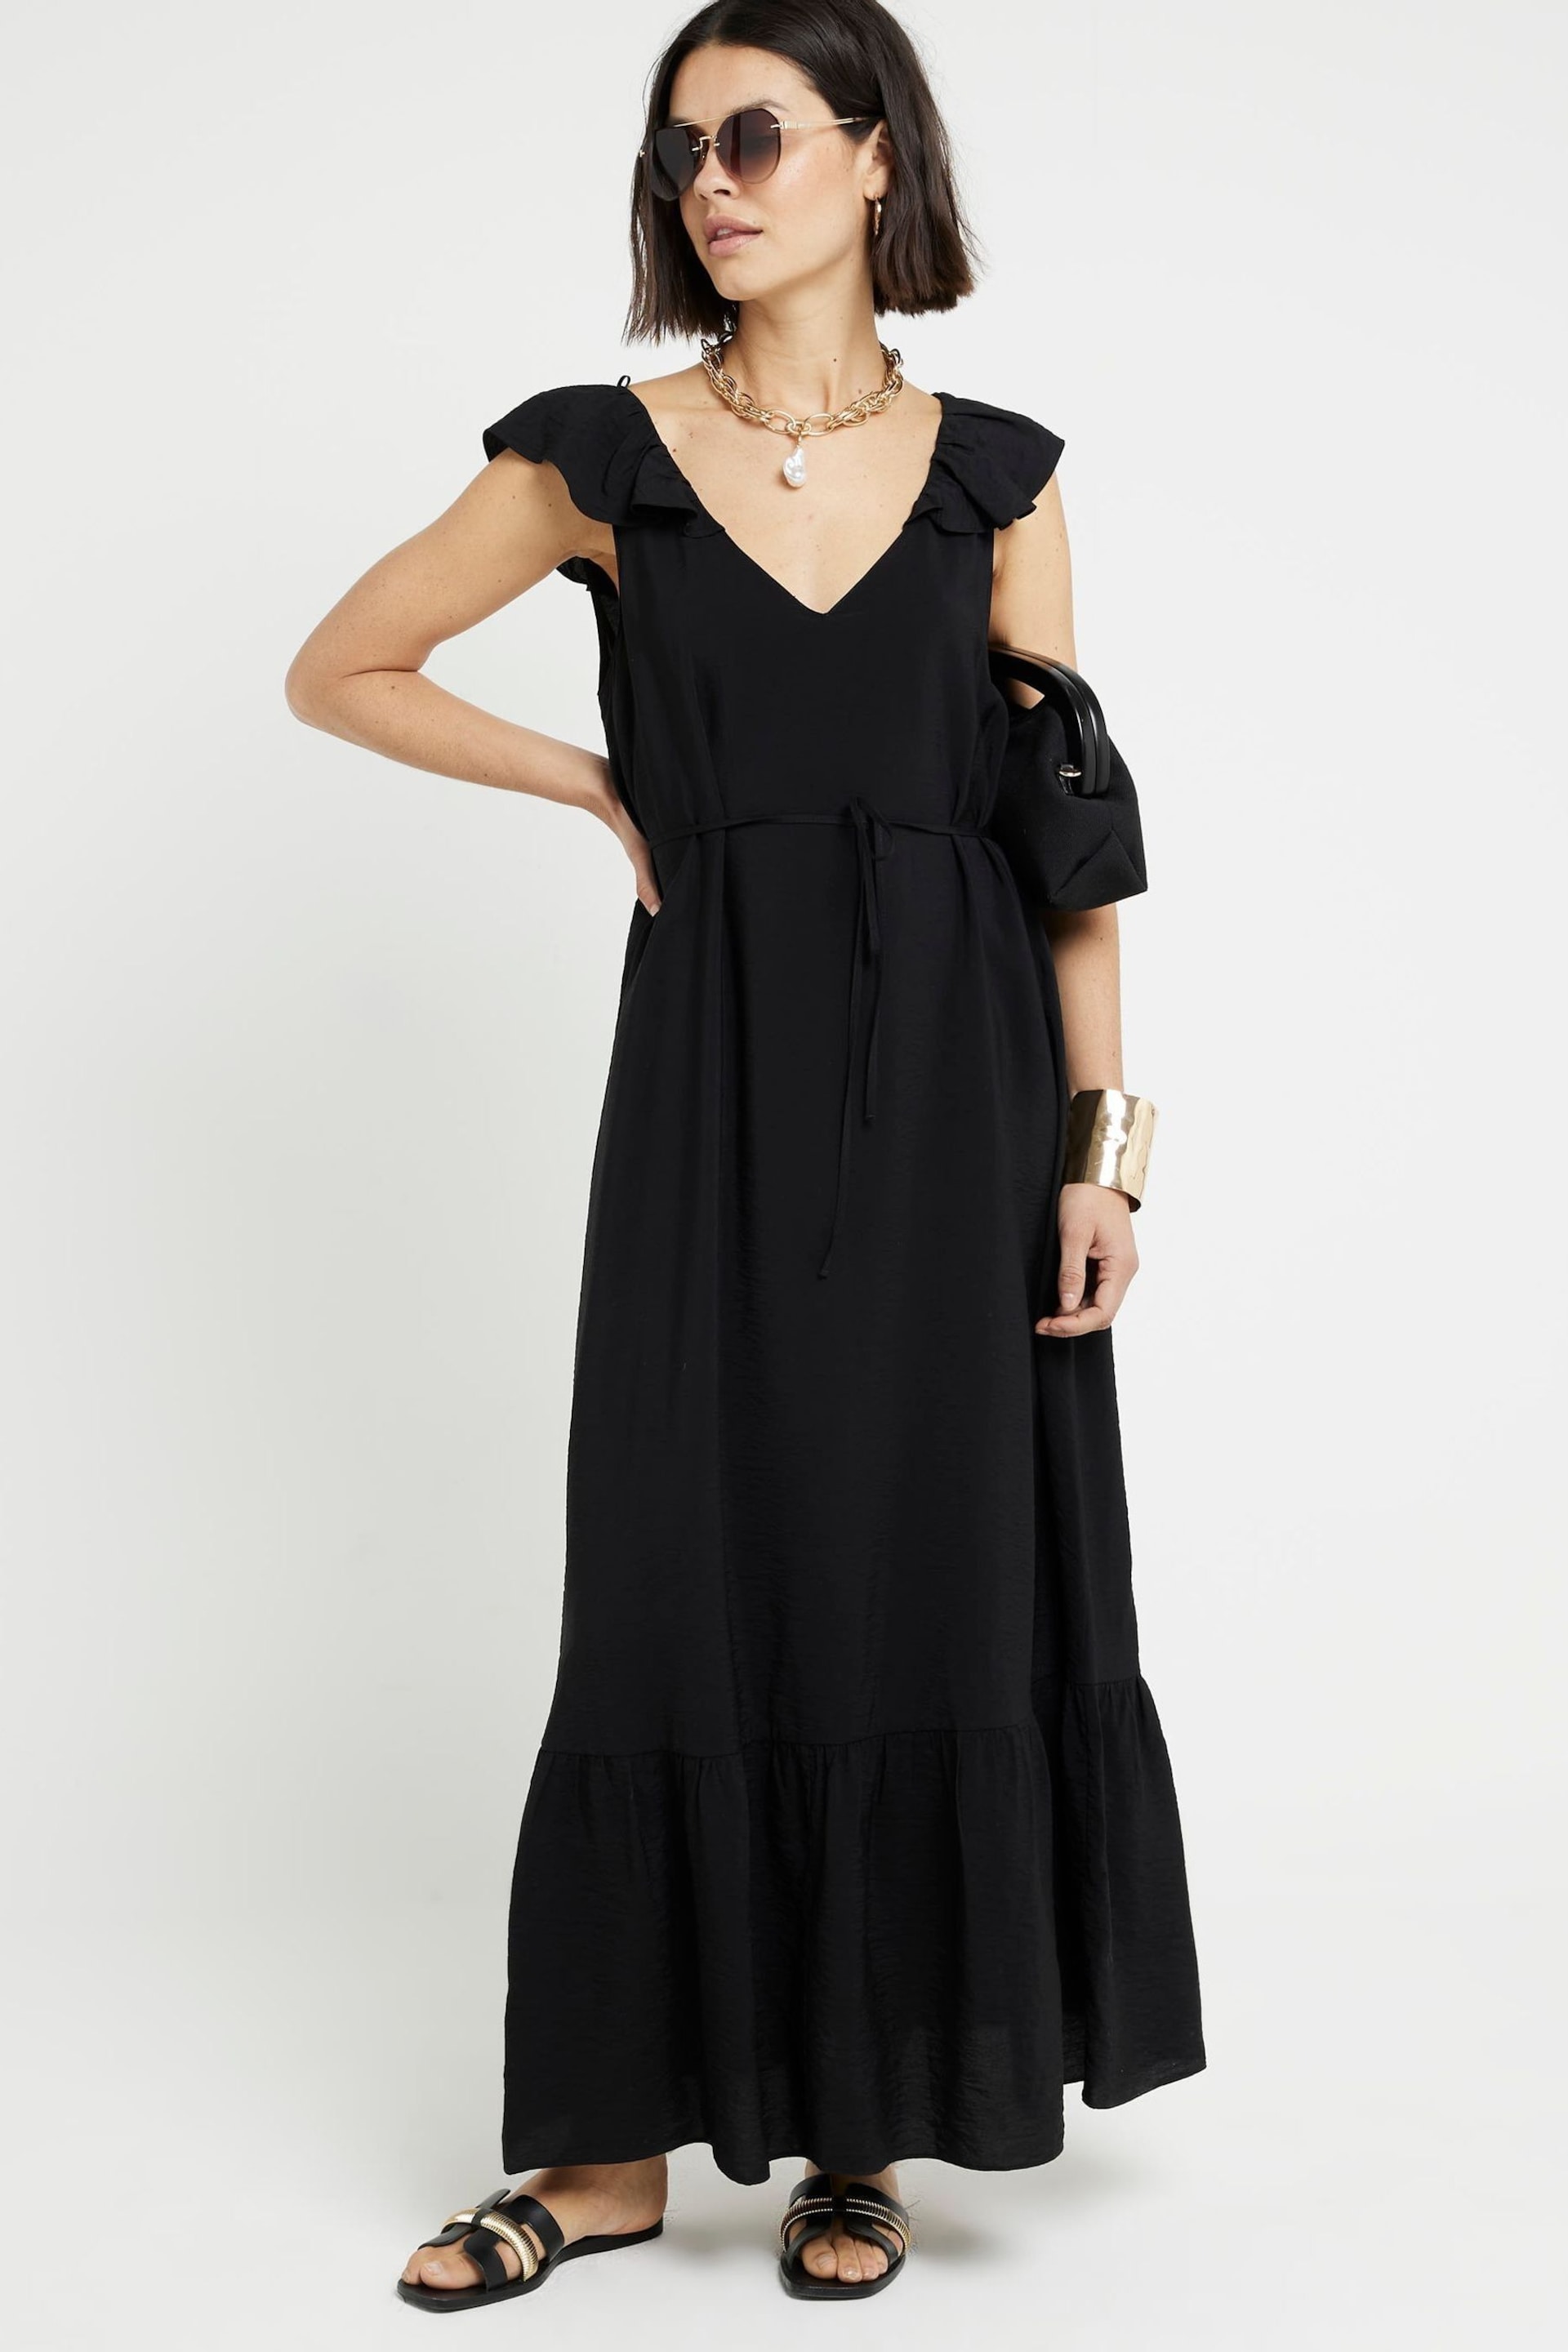 River Island Black Floral Frill Sleeve Maxi Dress - Image 1 of 3